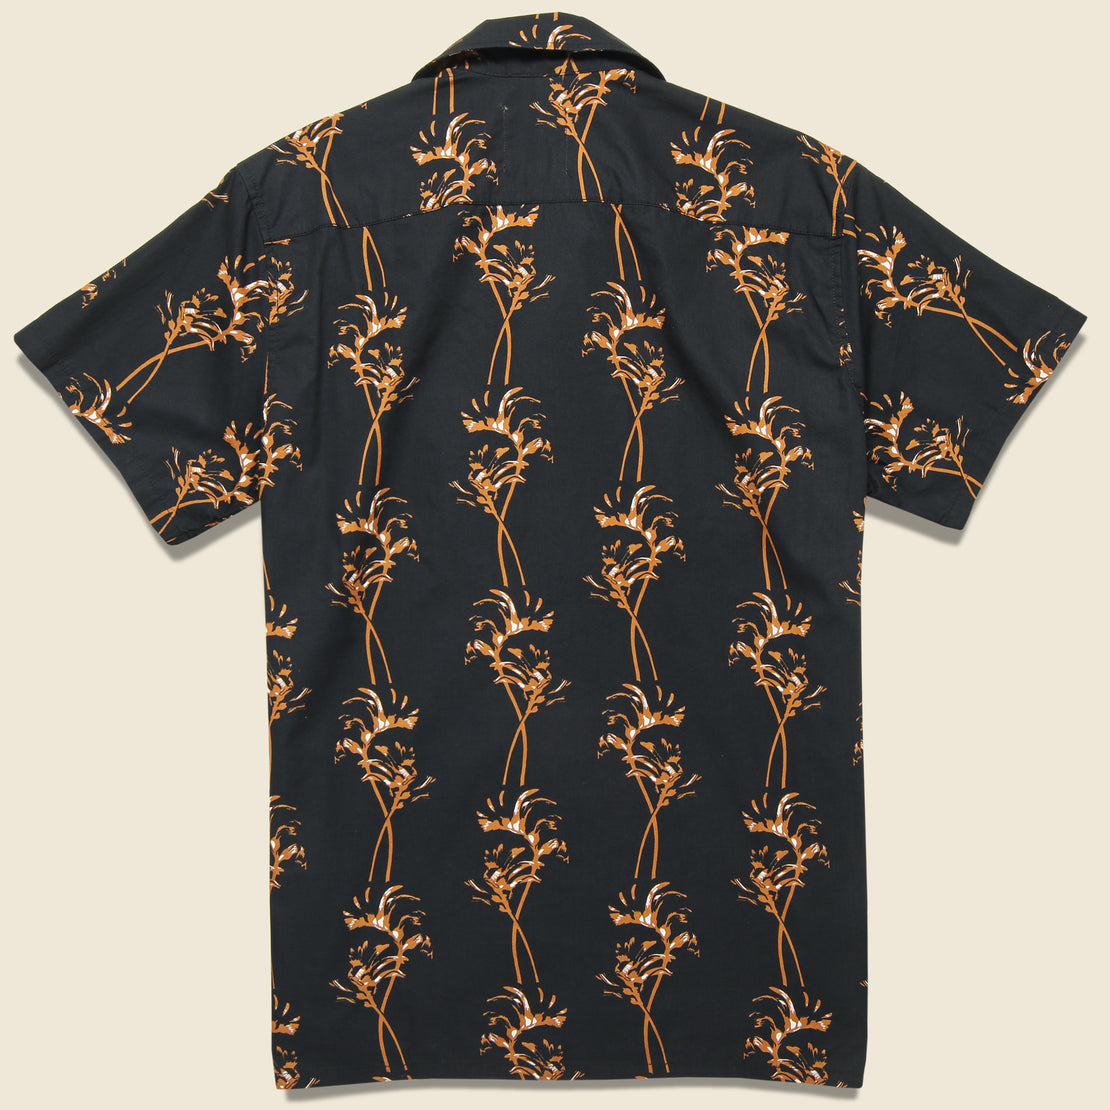 Kanga Shirt - Black - Life After Denim - STAG Provisions - Tops - S/S Woven - Floral